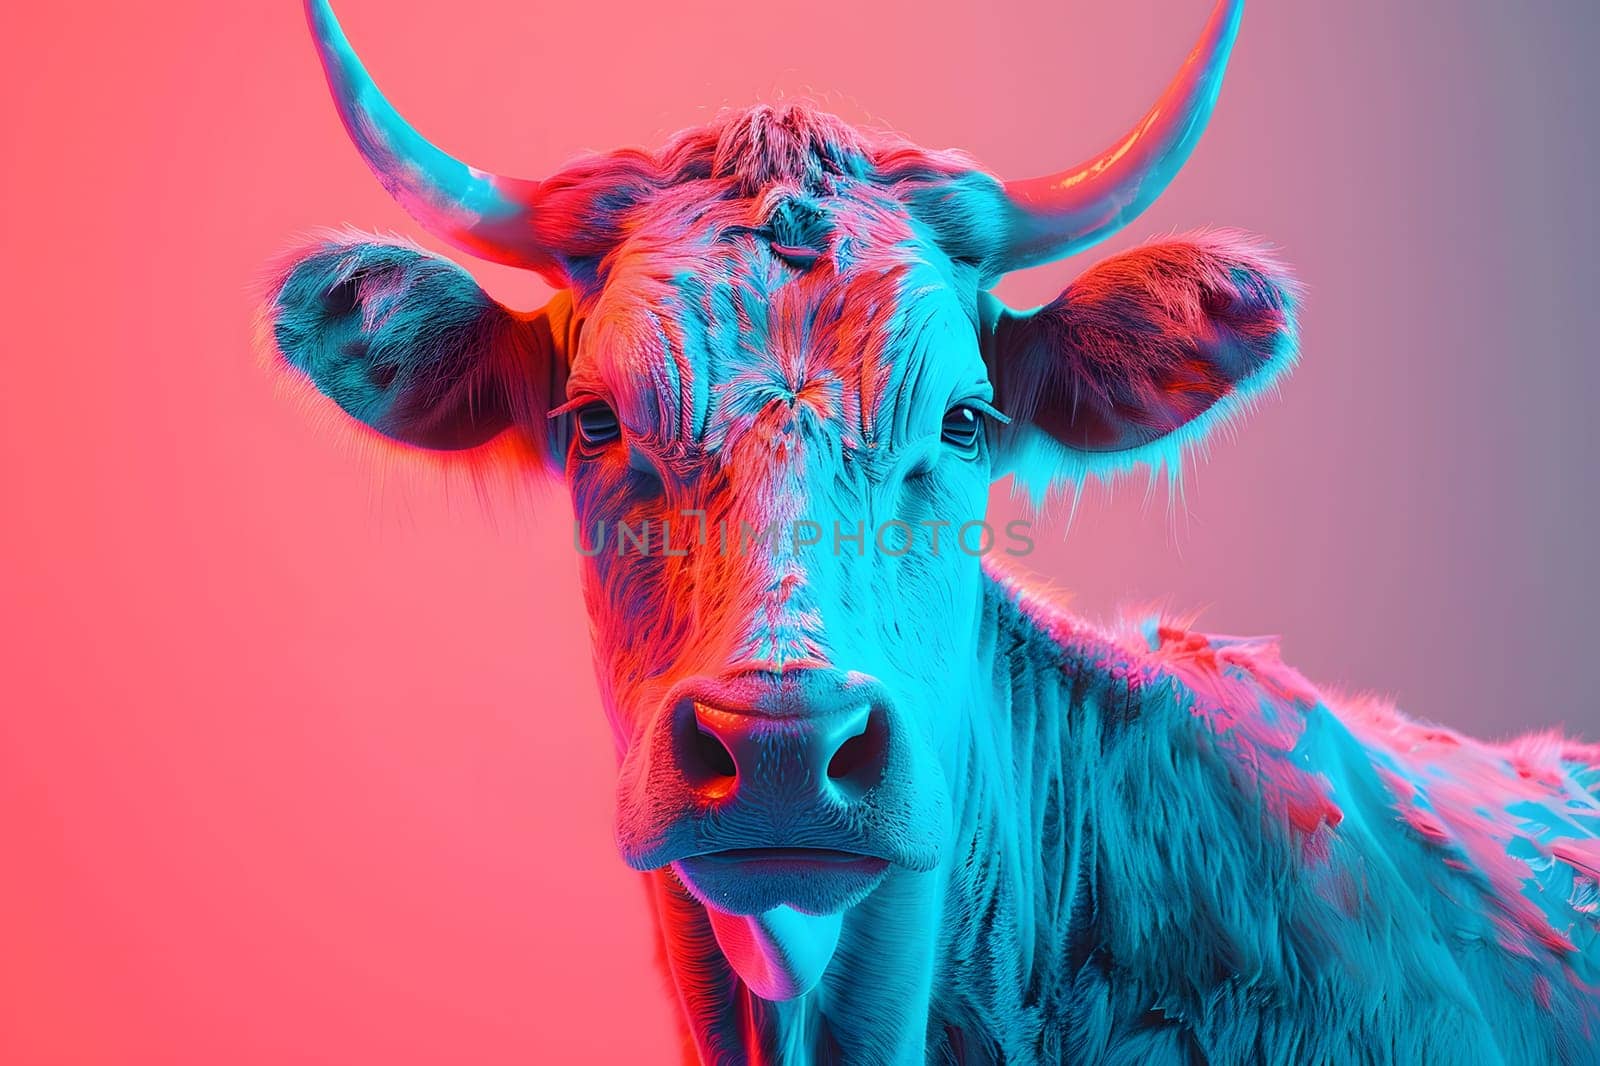 Closeup of a bulls horned snout against a red and blue background by Nadtochiy